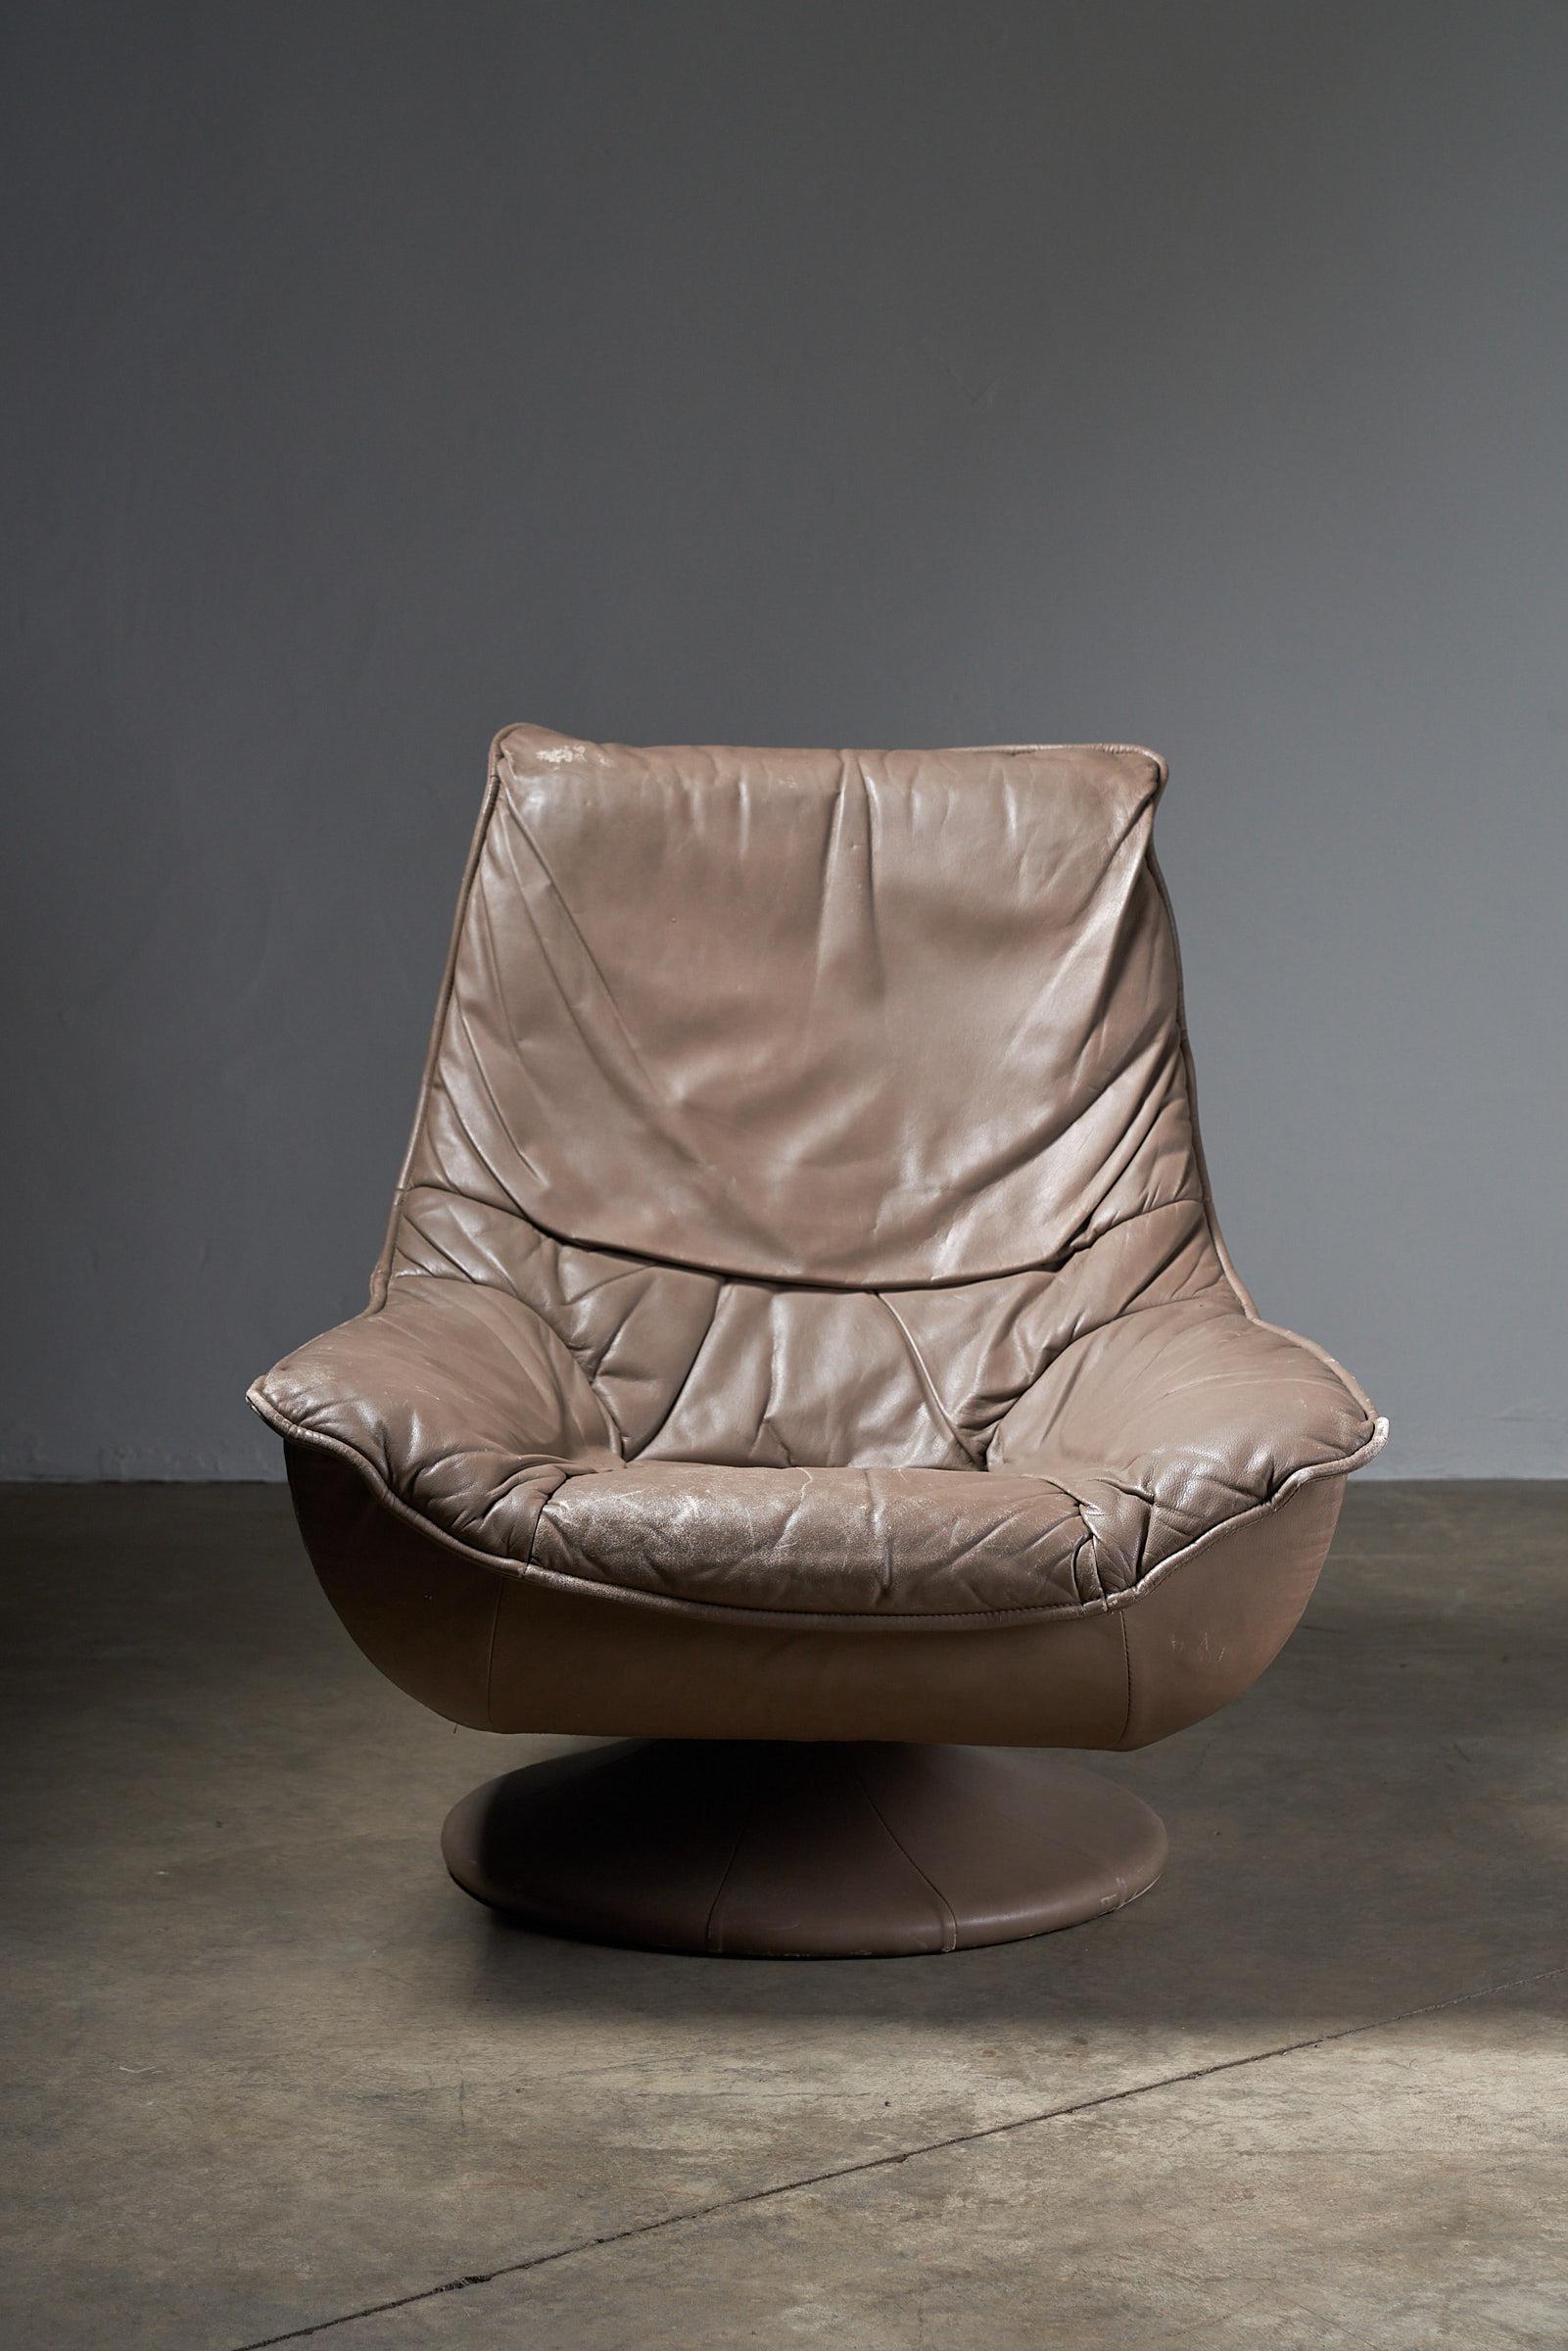 Discover timeless sophistication with our Elegant Swivel Lounge Chair in luxurious brown leather. This distinguished piece seamlessly combines comfort and style with its ergonomic design and rich leather upholstery. The swivel feature adds a touch